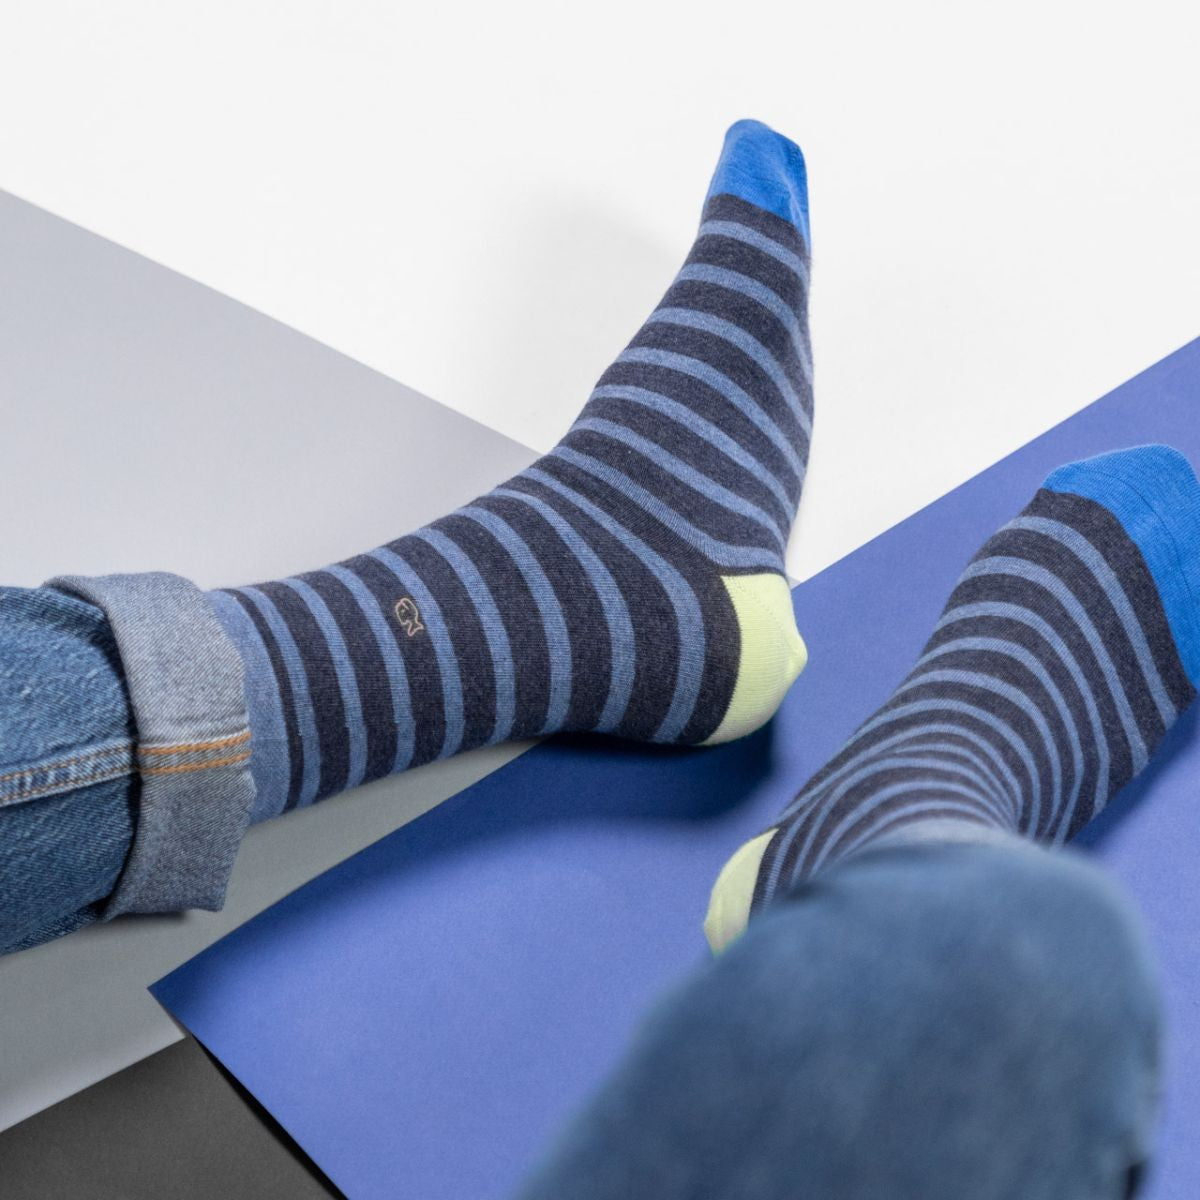 Combed cotton socks Wide stripes - Navy and neon